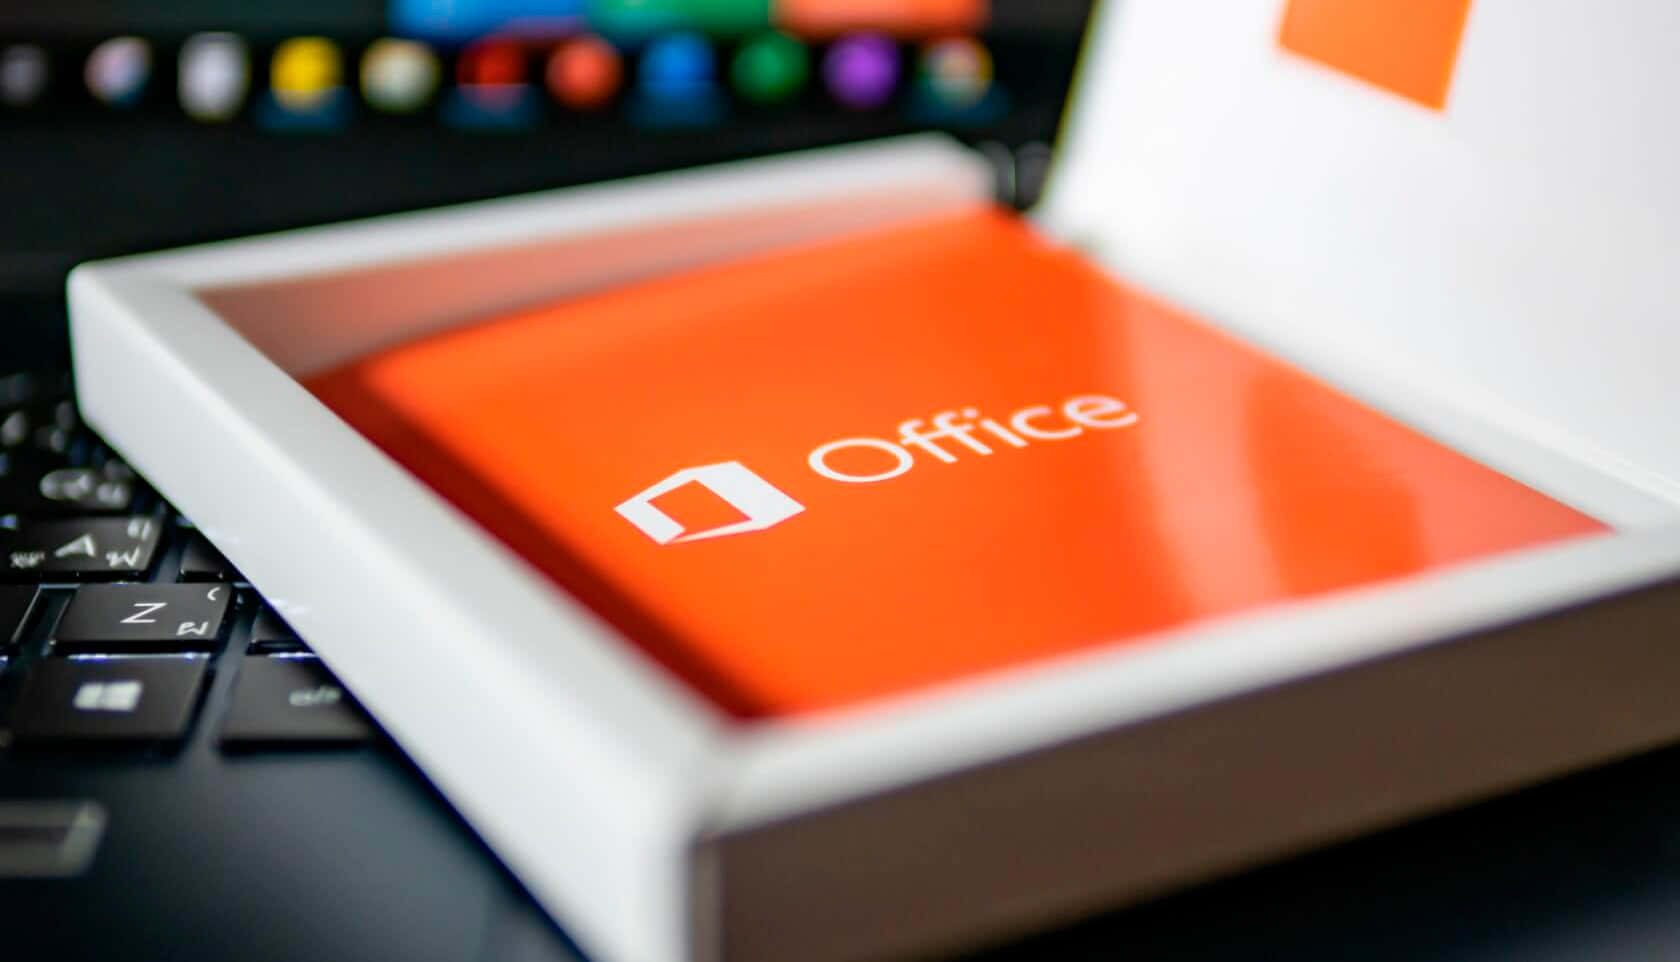 Get the Most Out of Office 365